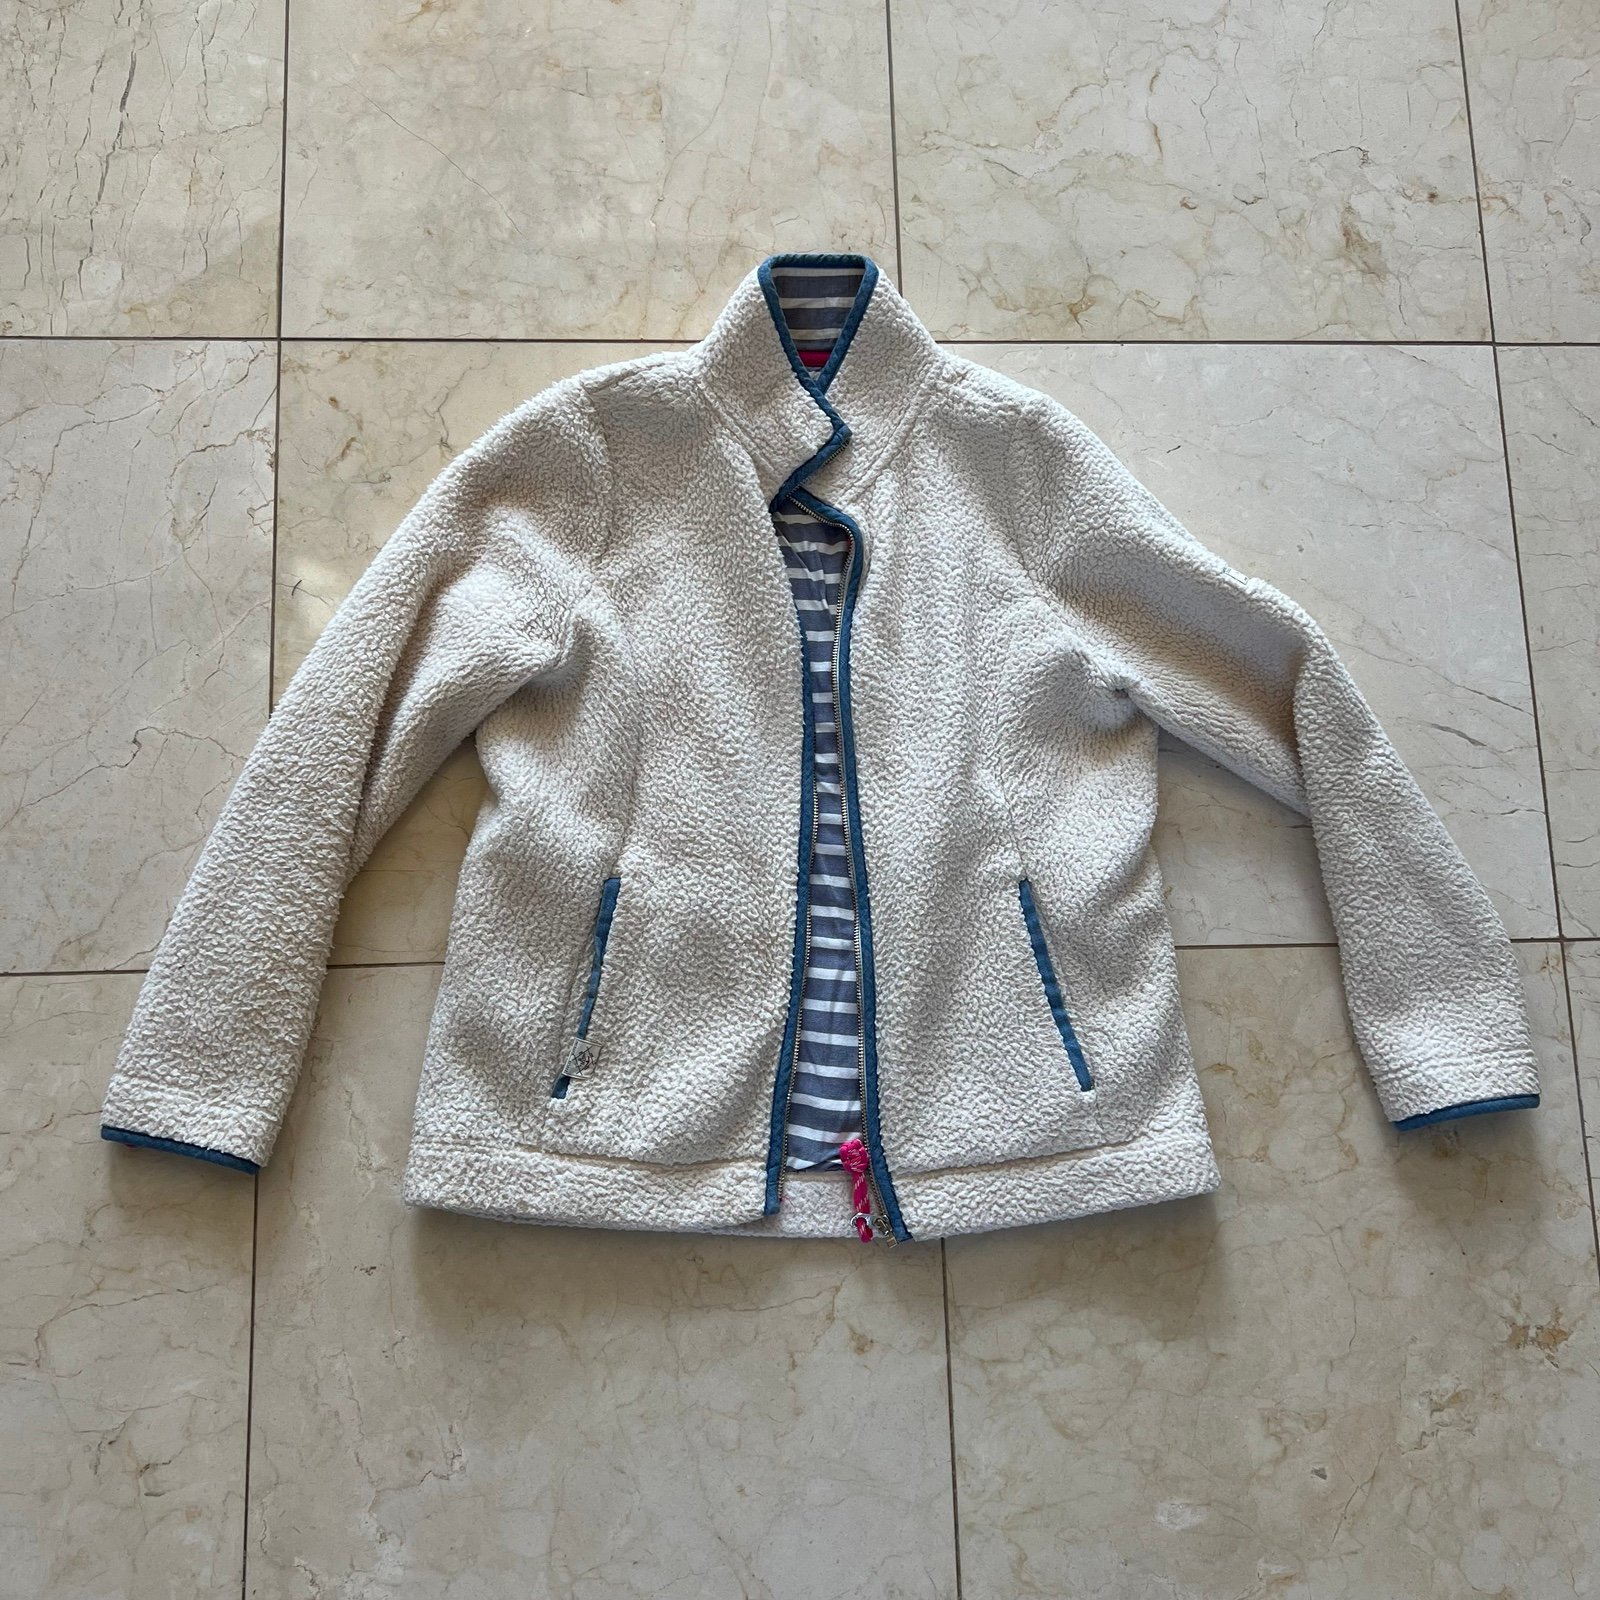 cheapest place to buy  Joules Clothing Sherpa Like Jacket Size Medium okN6CO7HT best sale